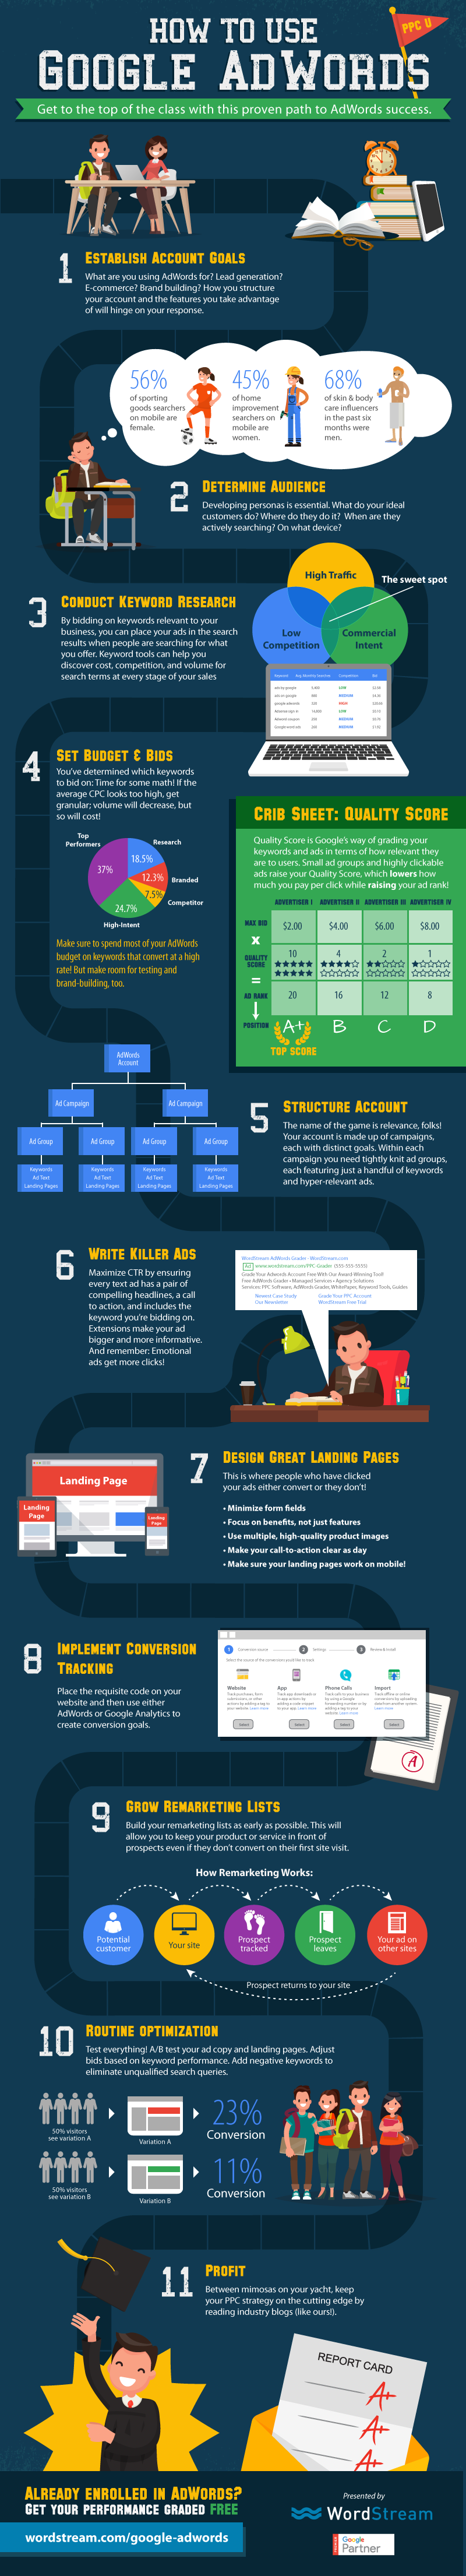 How to Use Google AdWords - #Infographic